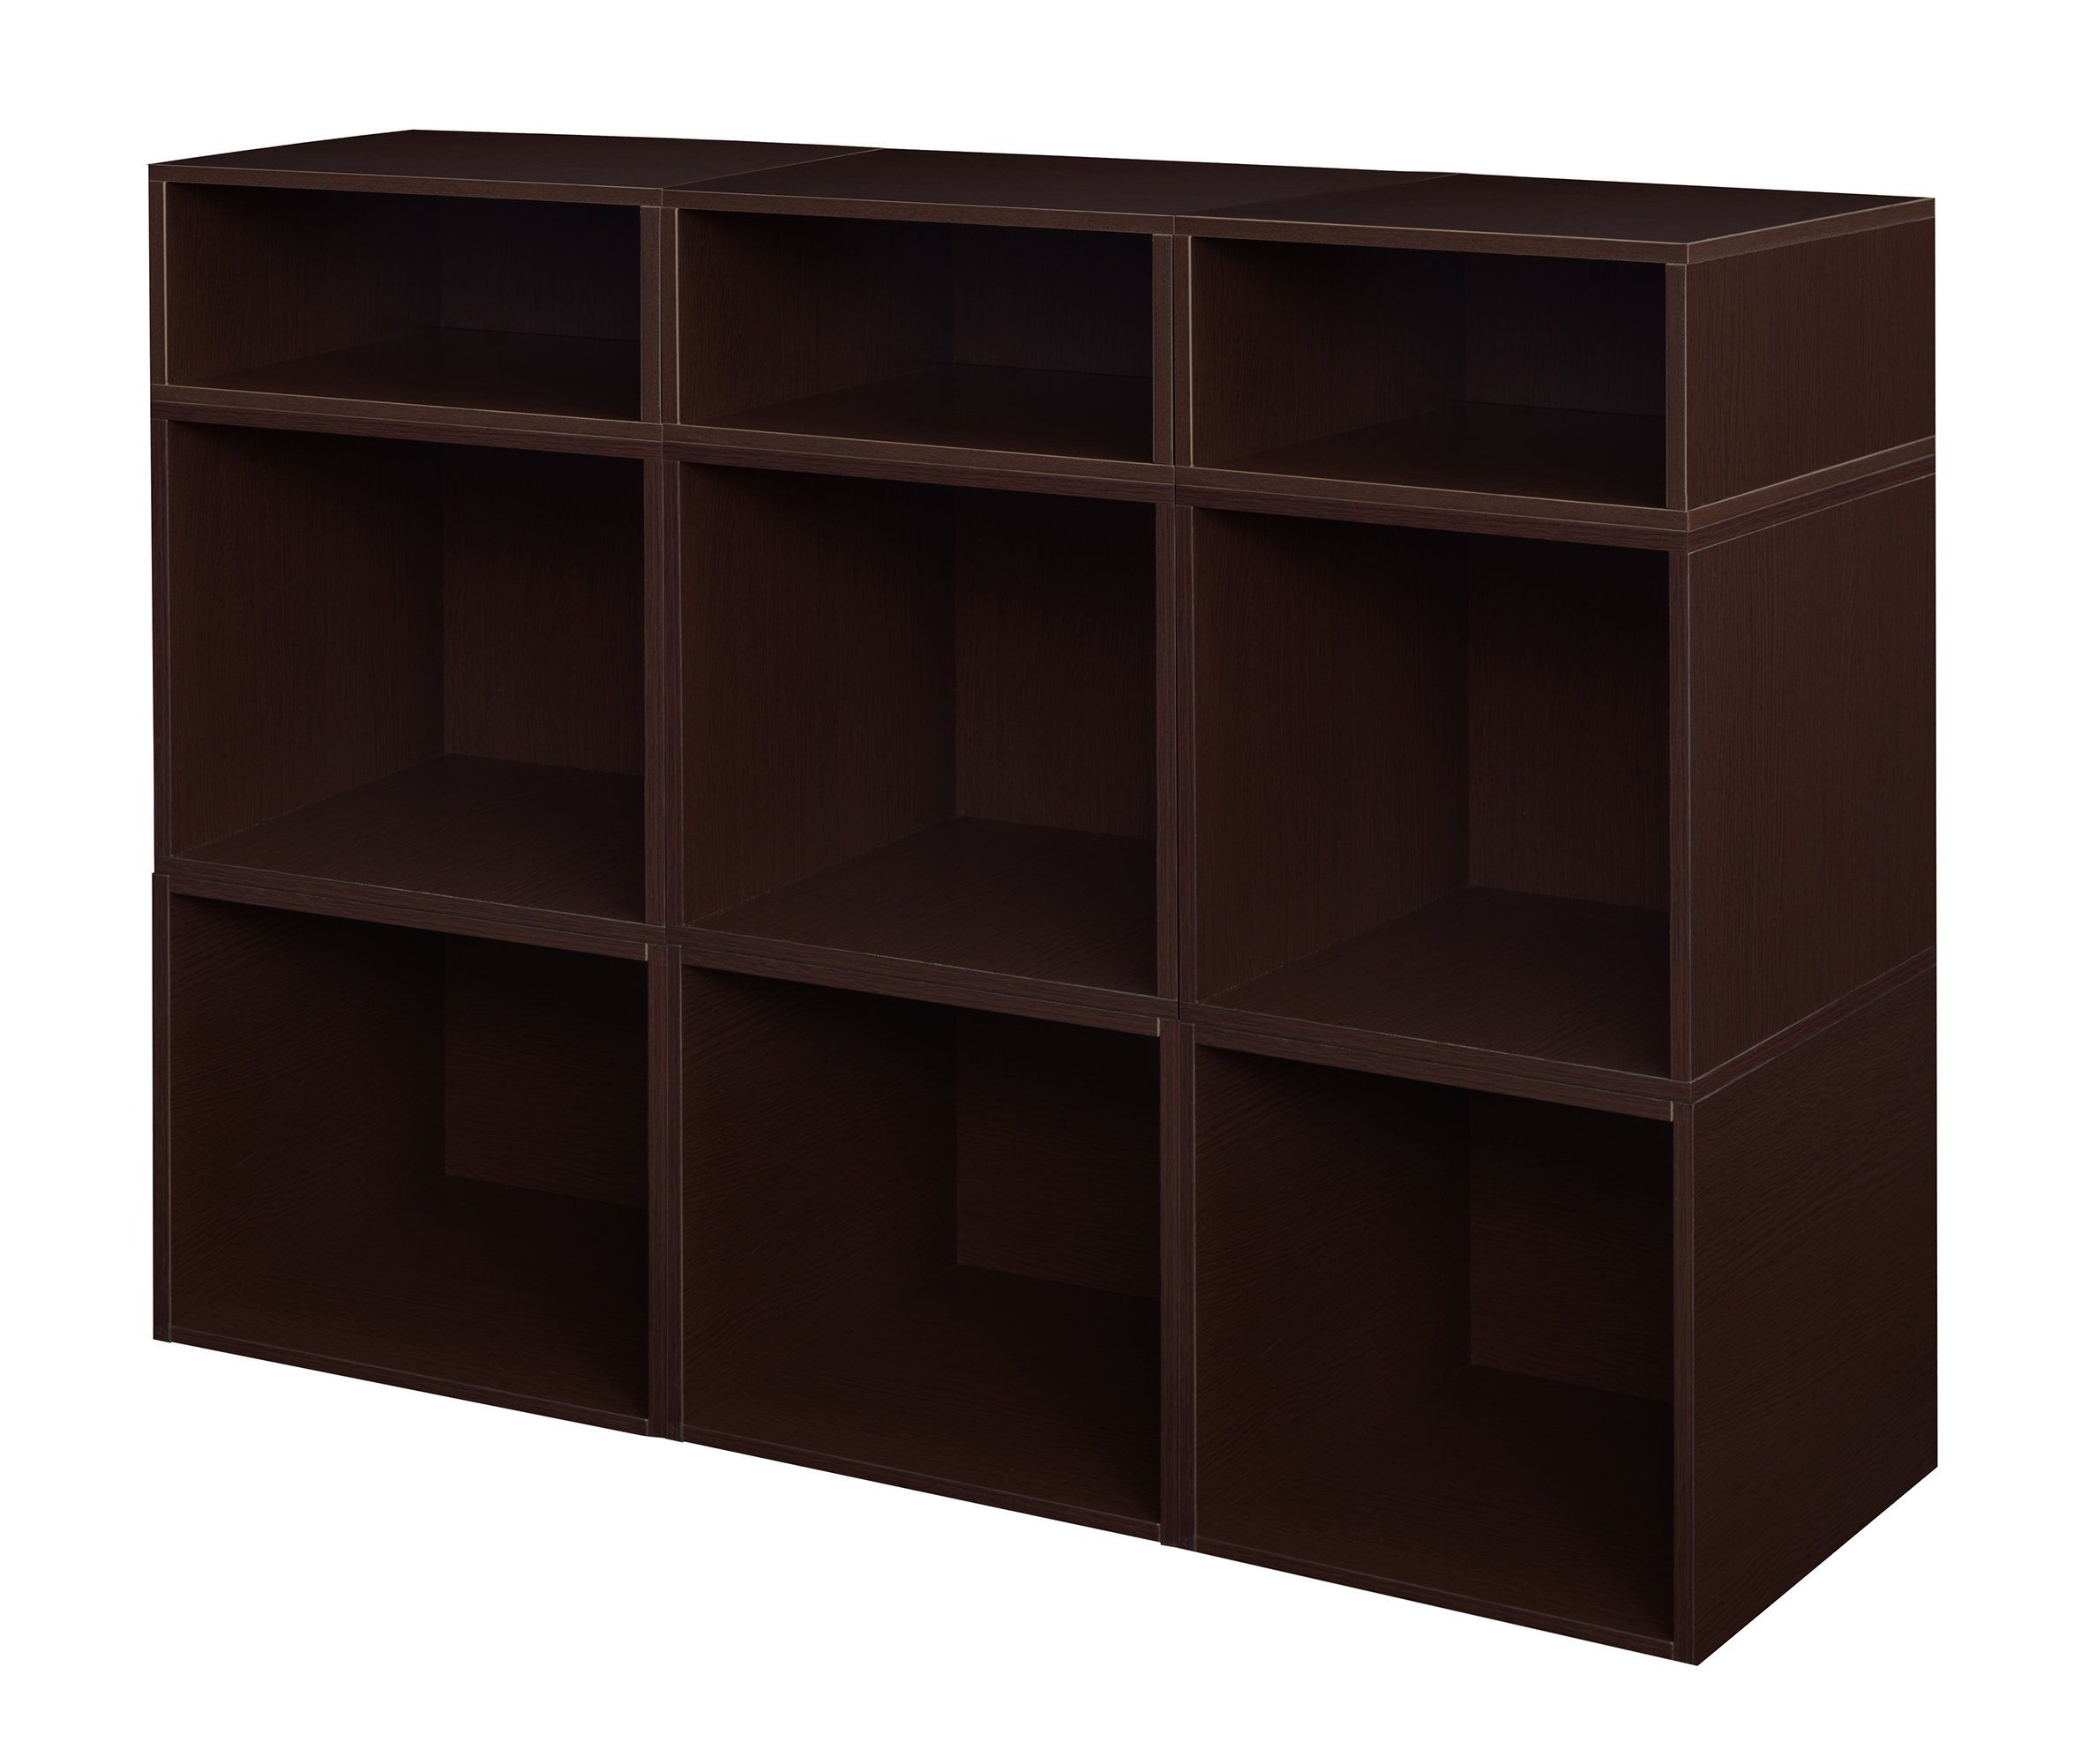 Favorite Chastain Storage Cube Unit Bookcases With Regard To Chastain Standard Bookcase (View 6 of 20)